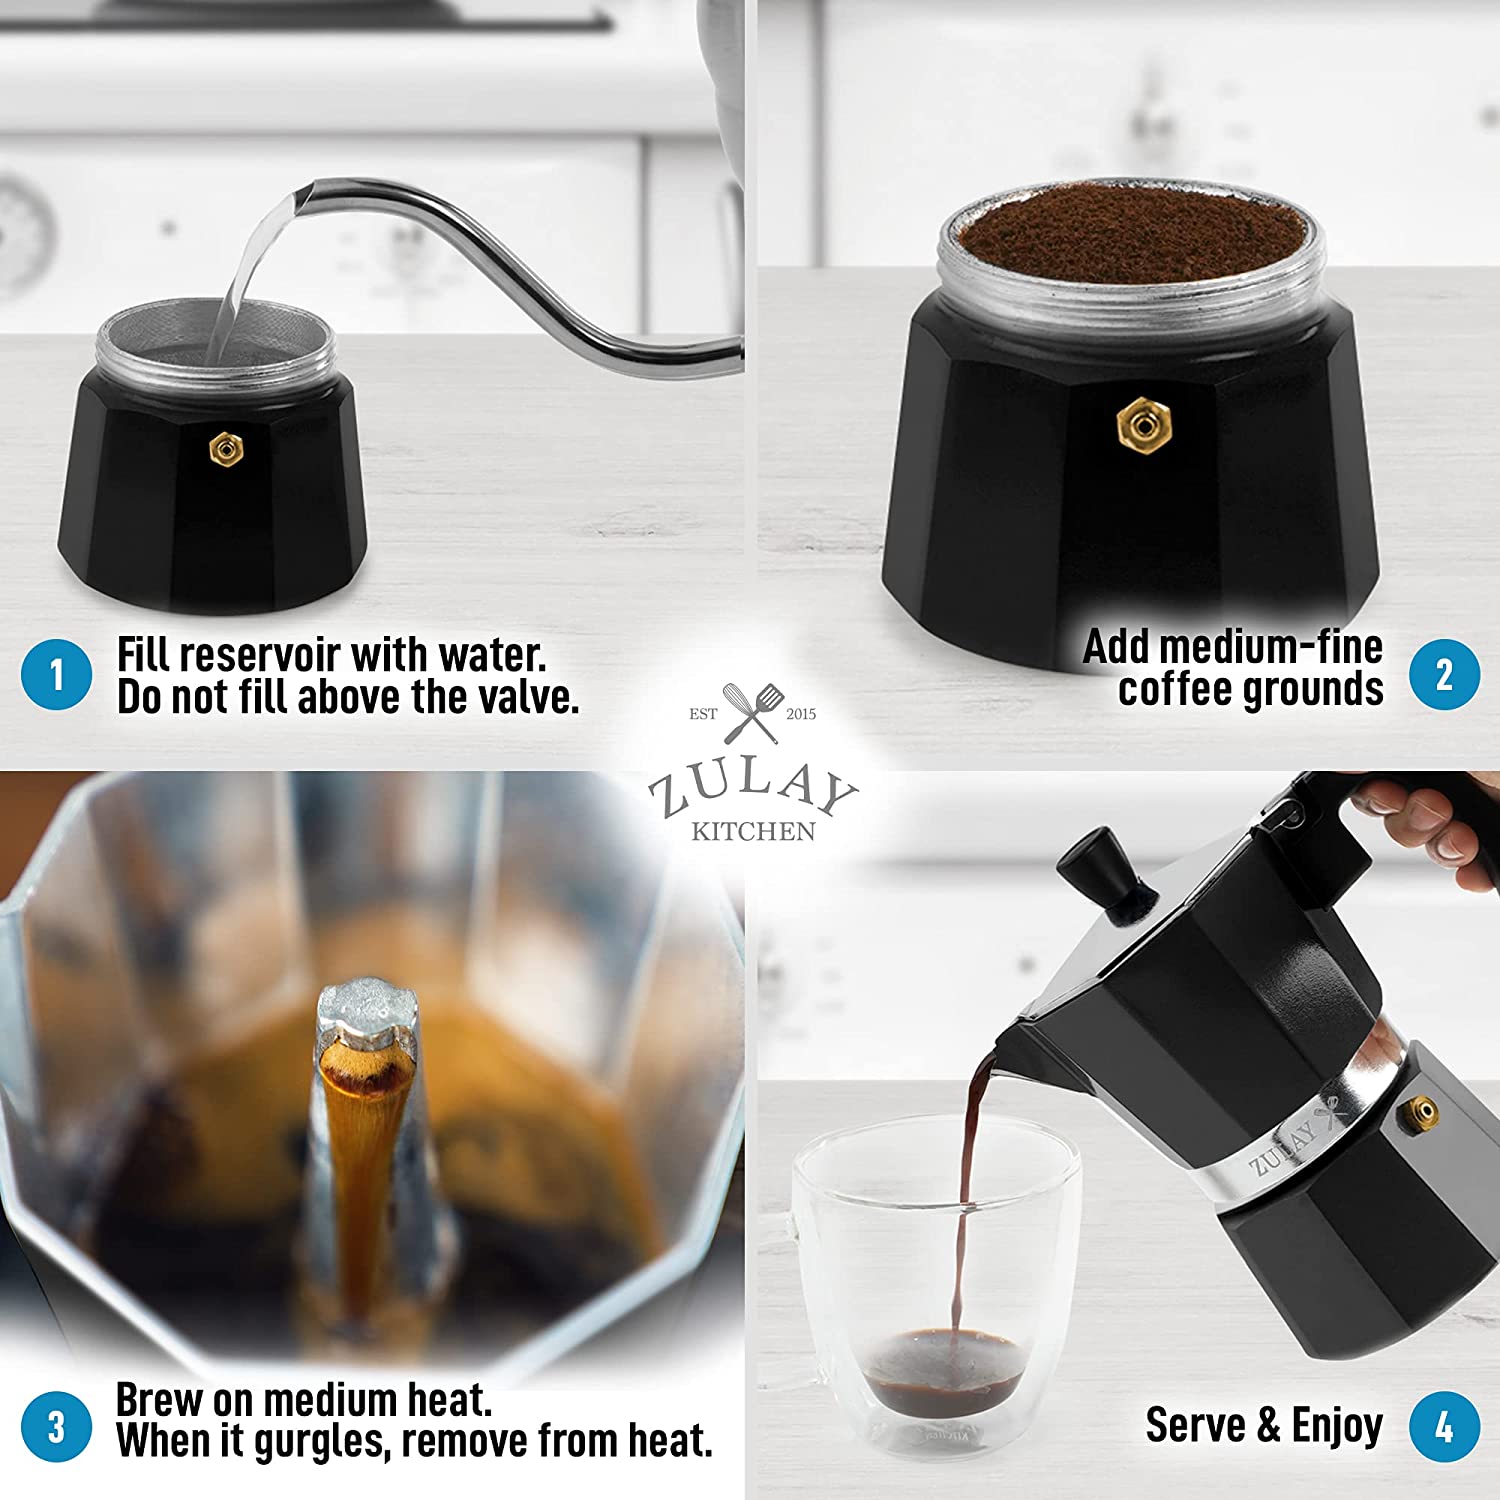 Find Classic Spanish Coffee Maker With a Modern Twist 